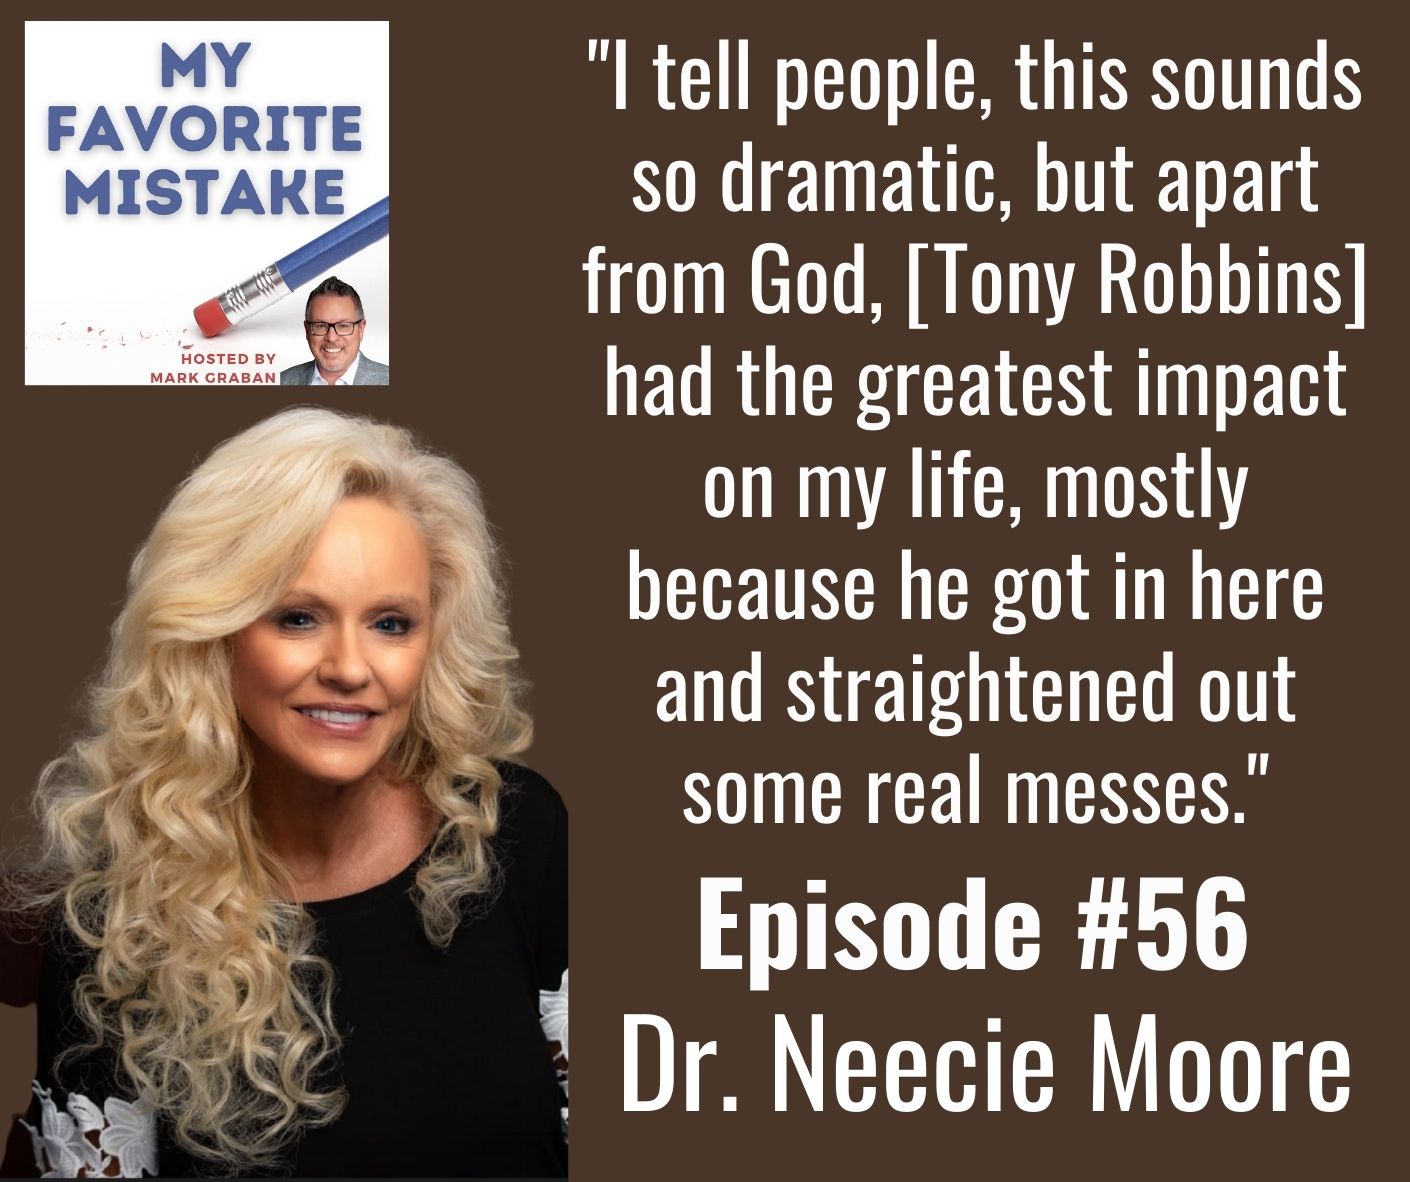 "I tell people, this sounds so dramatic, but apart from God, [Tony Robbins] had the greatest impact on my life, mostly because he got in here and straightened out some real messes."